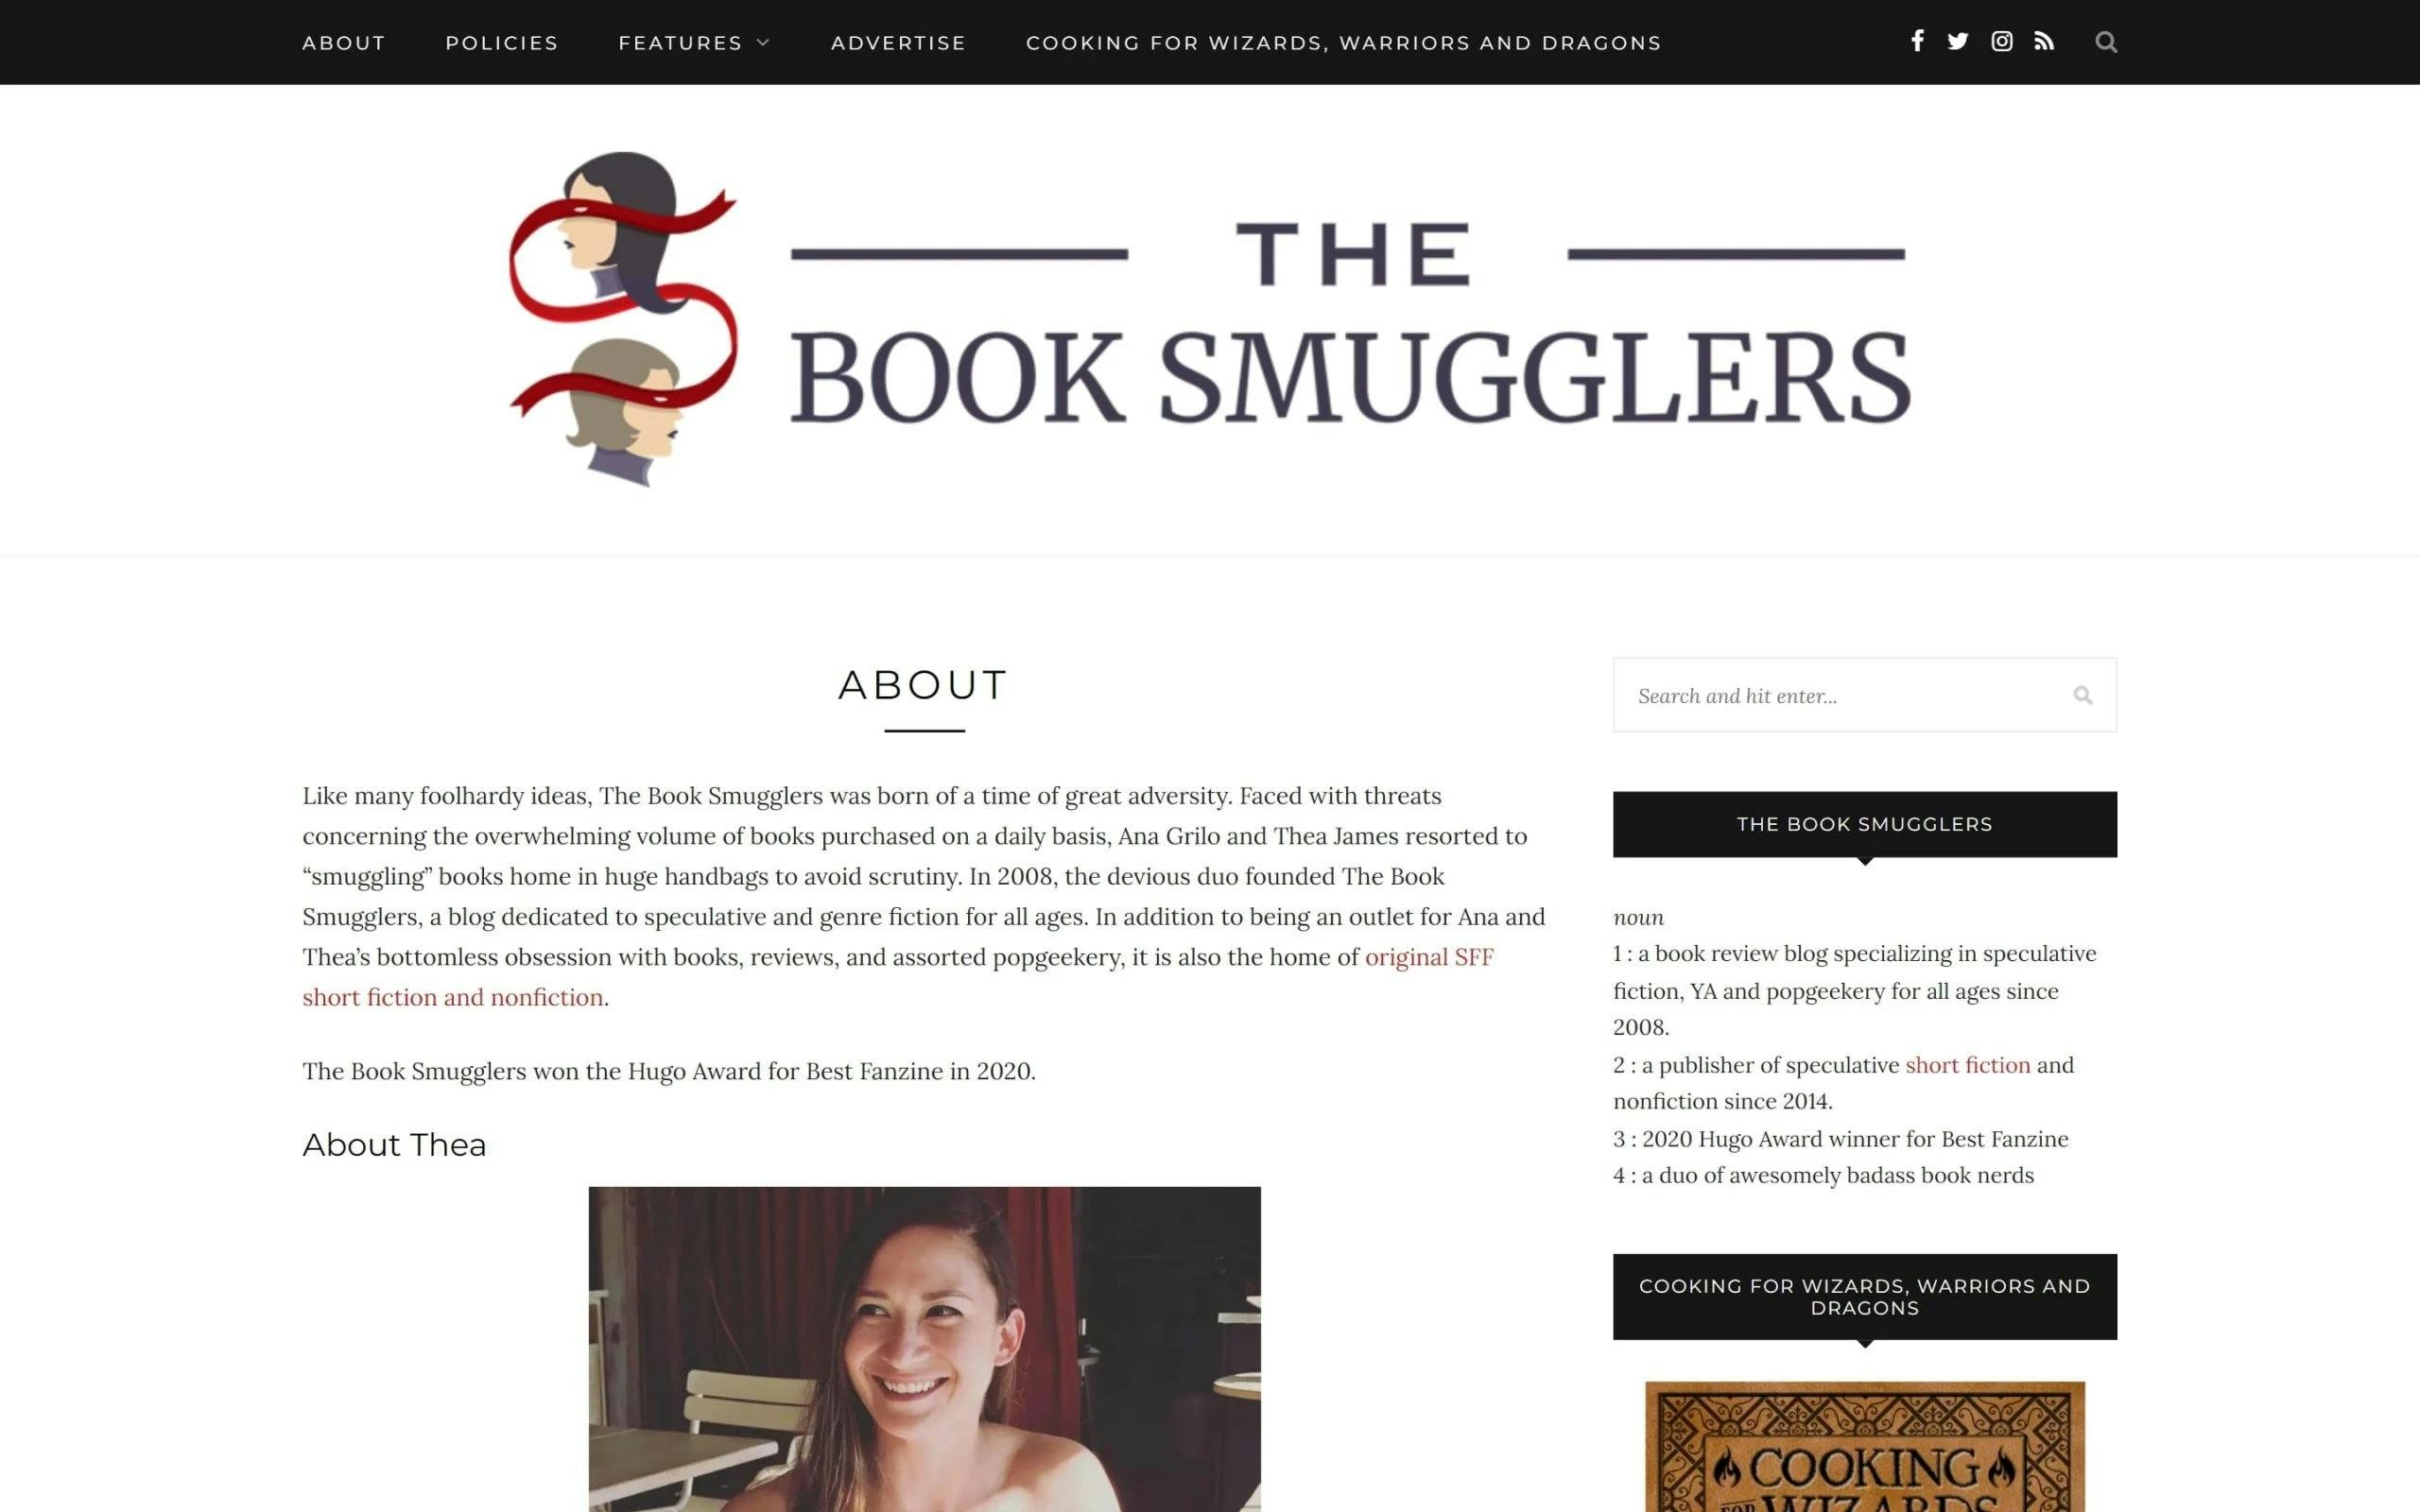 The Book Smugglers about me page